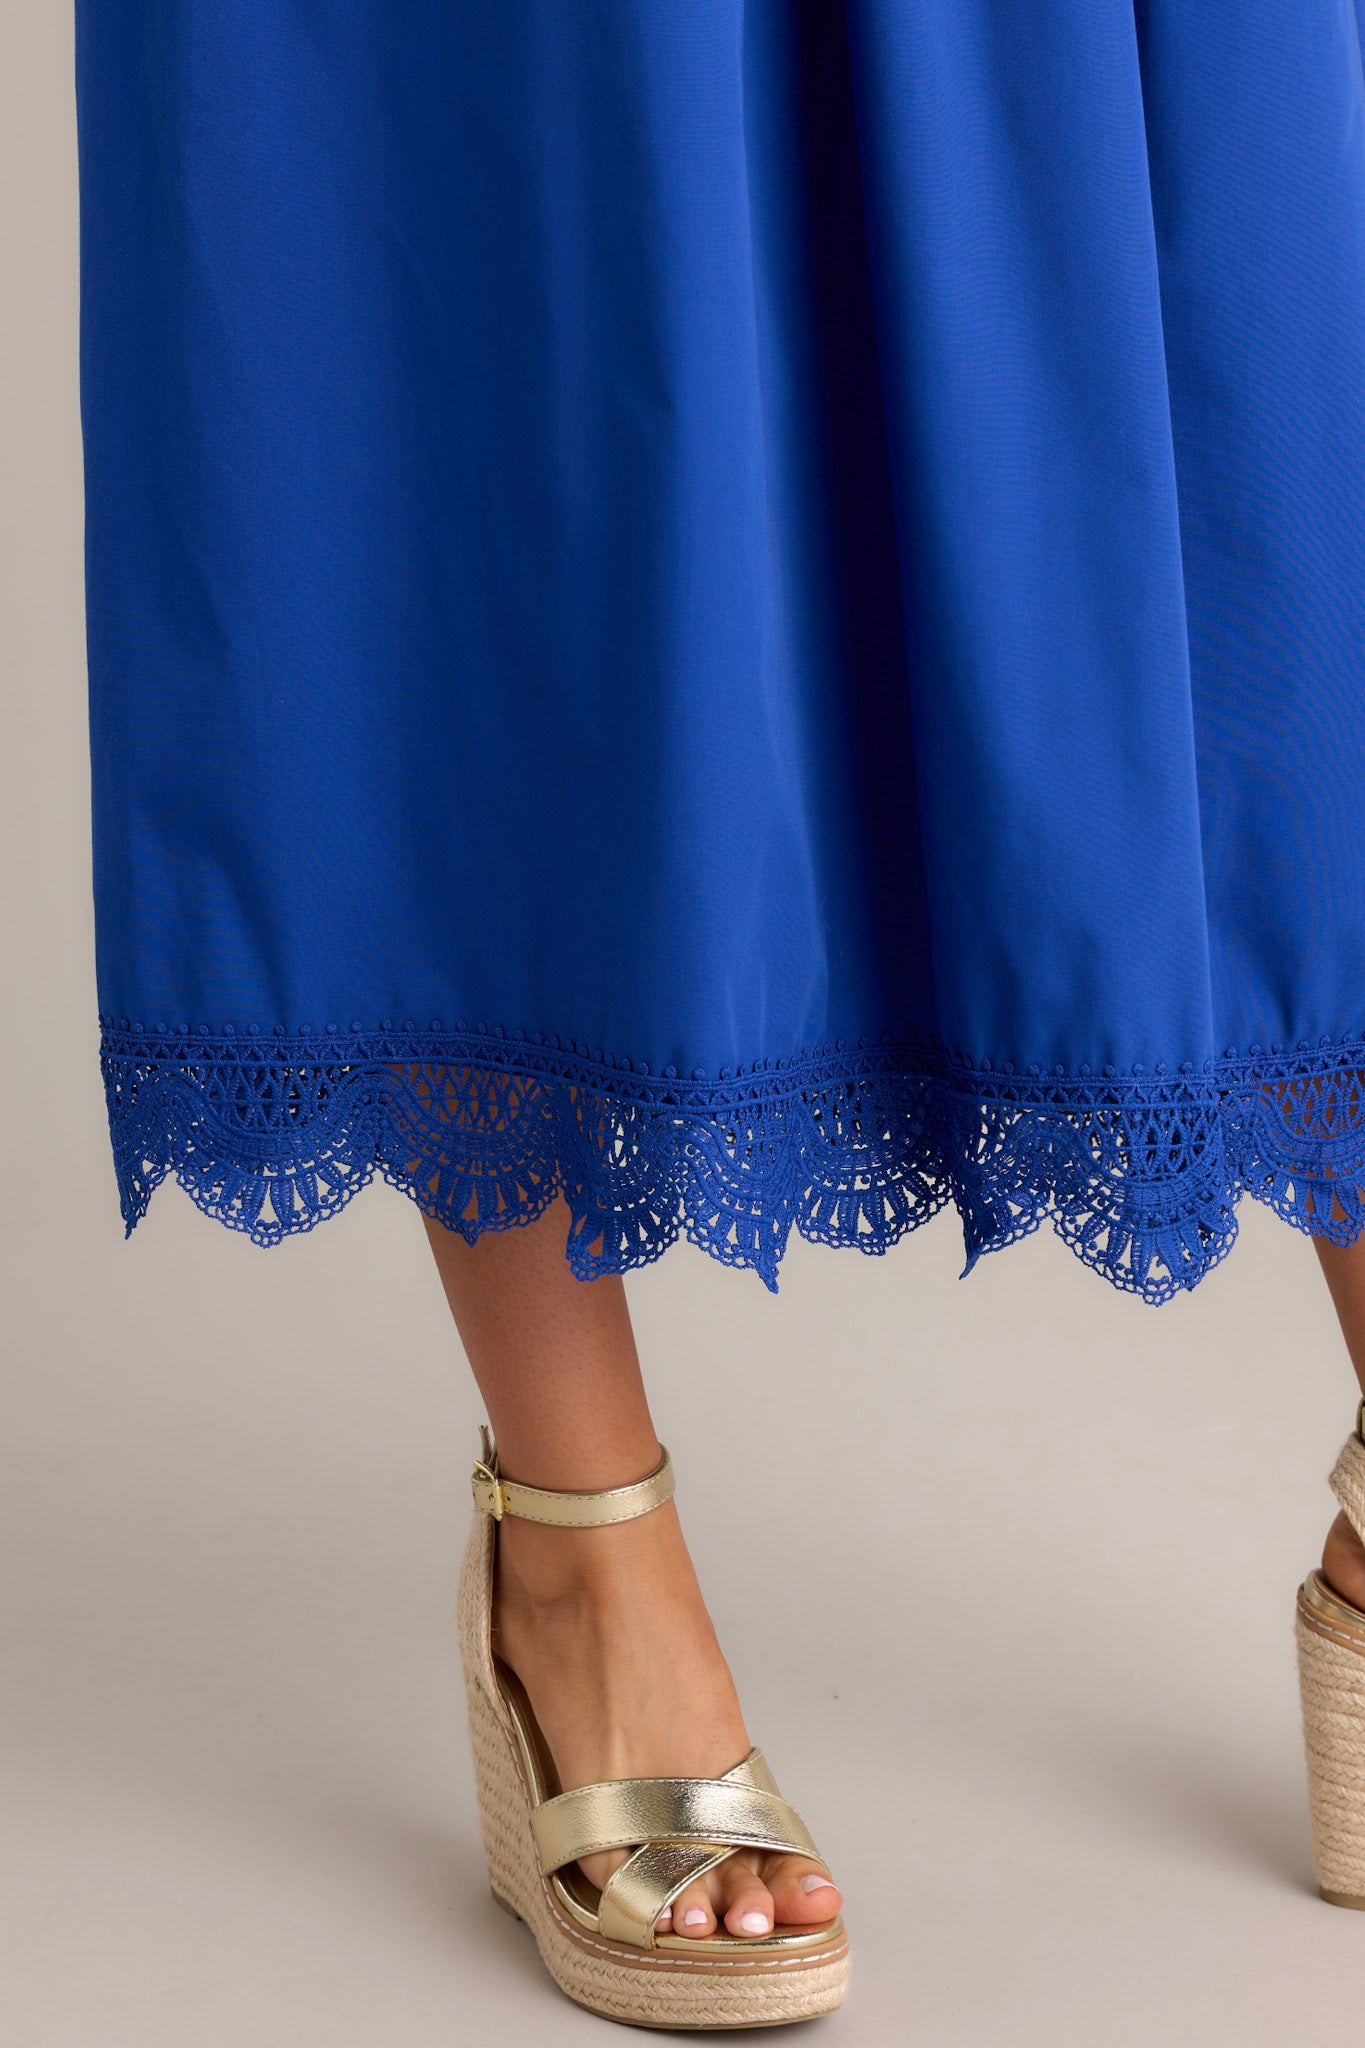 Close-up view of the lace detailing of this blue maxi dress showing the v-neckline, lace bust, and smocked waist & back.